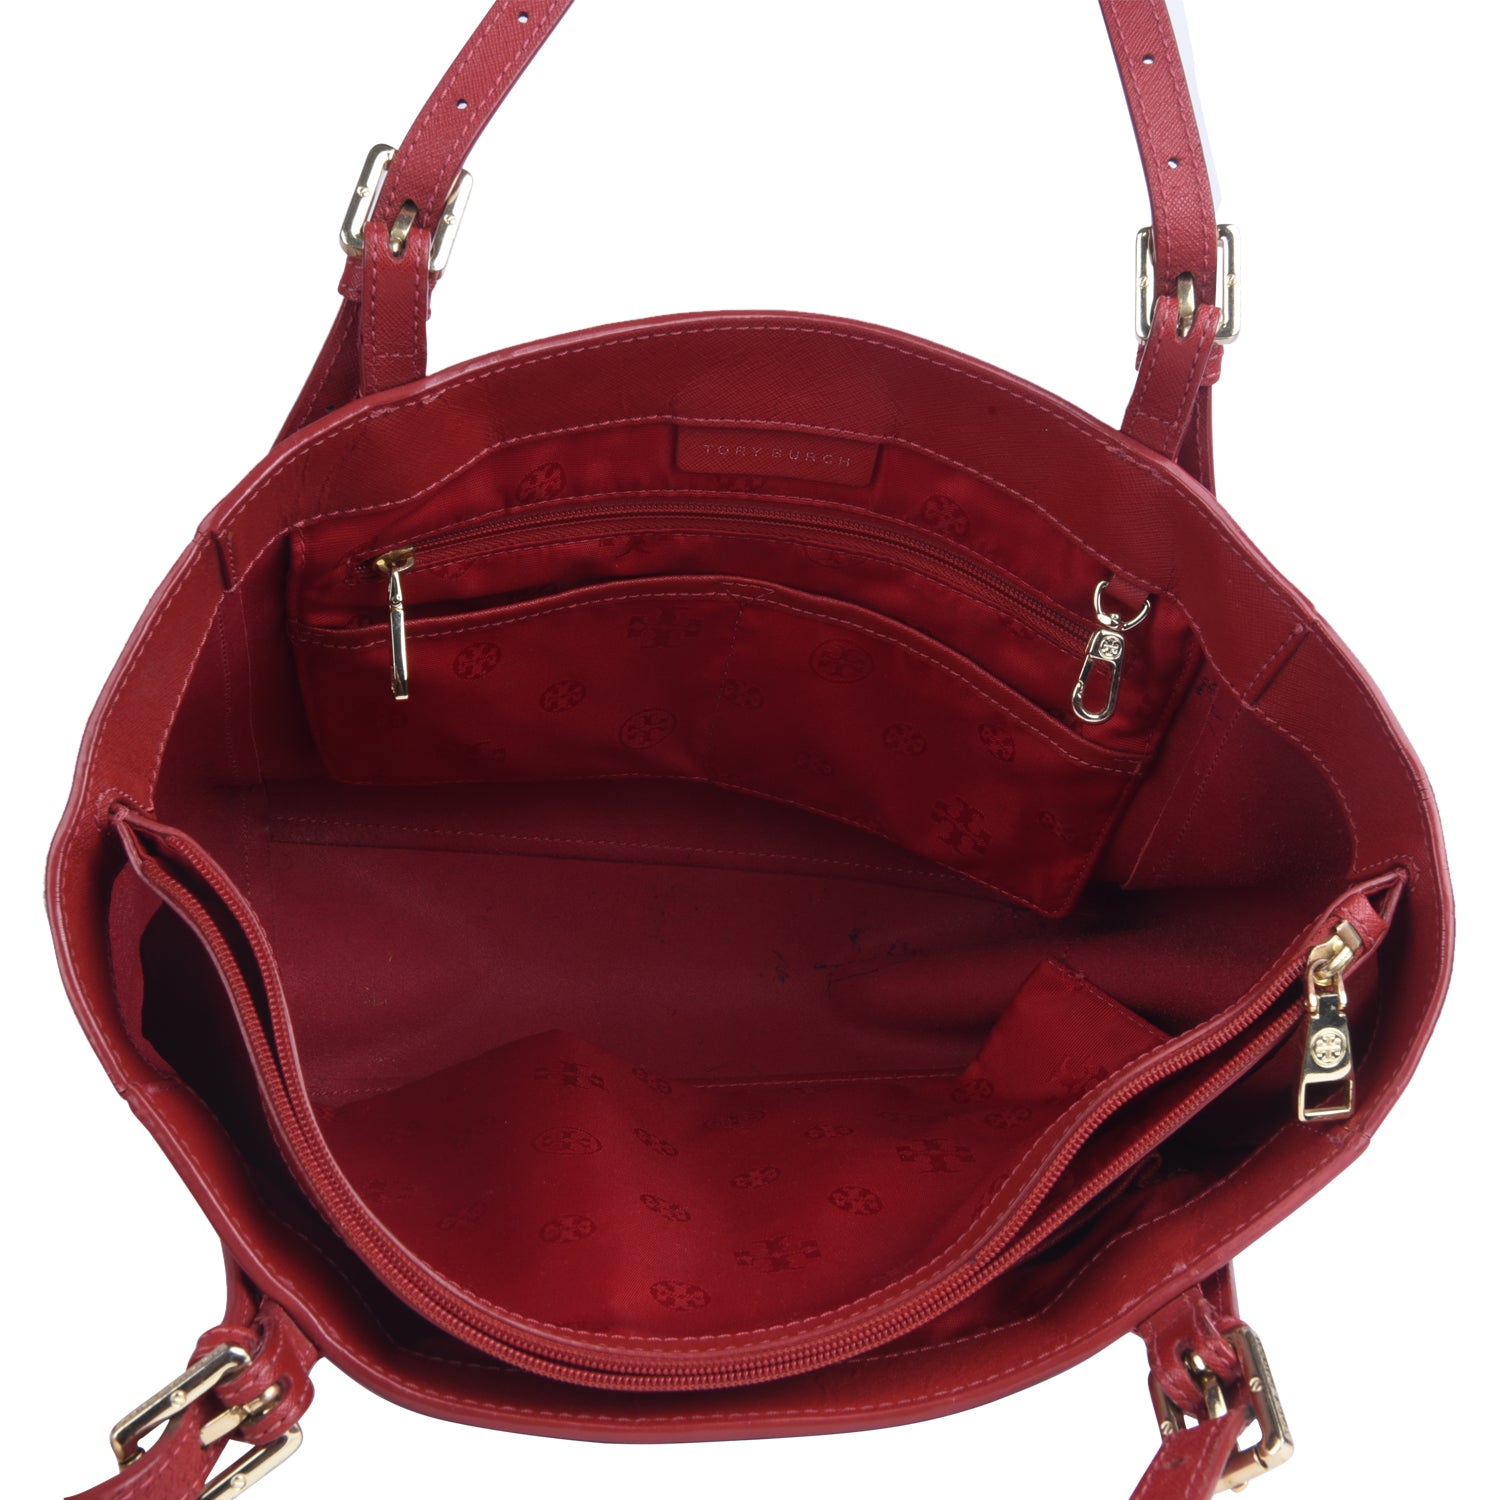 Tory Burch Red Leather York Buckle Tote Bag